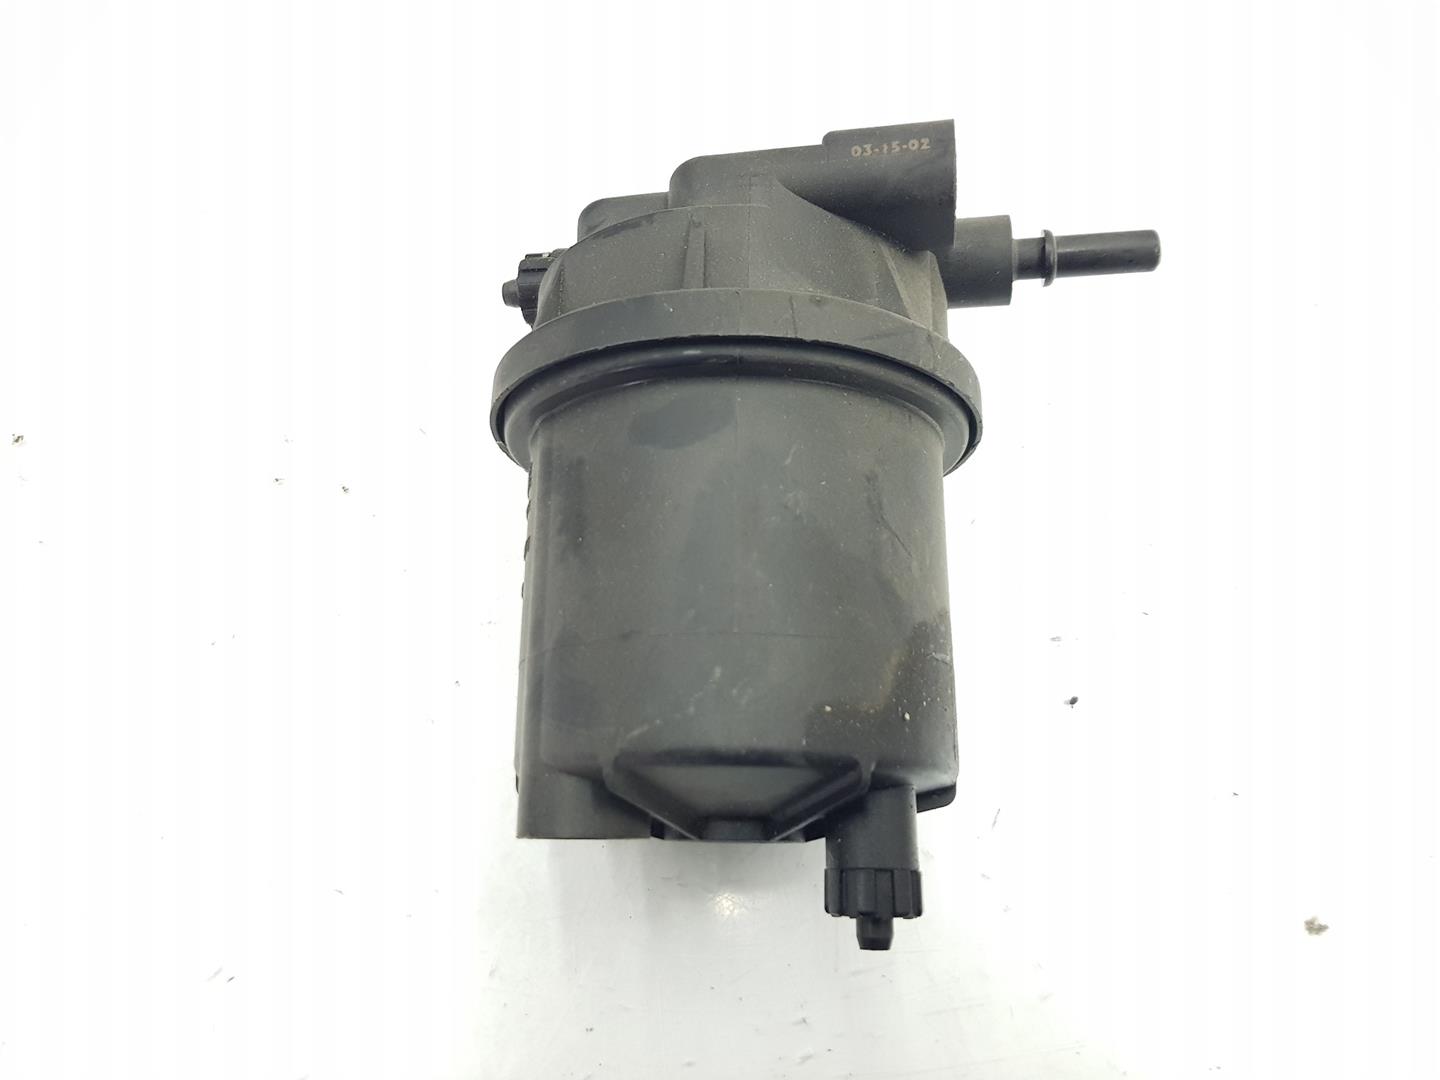 RENAULT Kangoo 1 generation (1998-2009) Other Engine Compartment Parts 7700116169, 6610964161 19808586